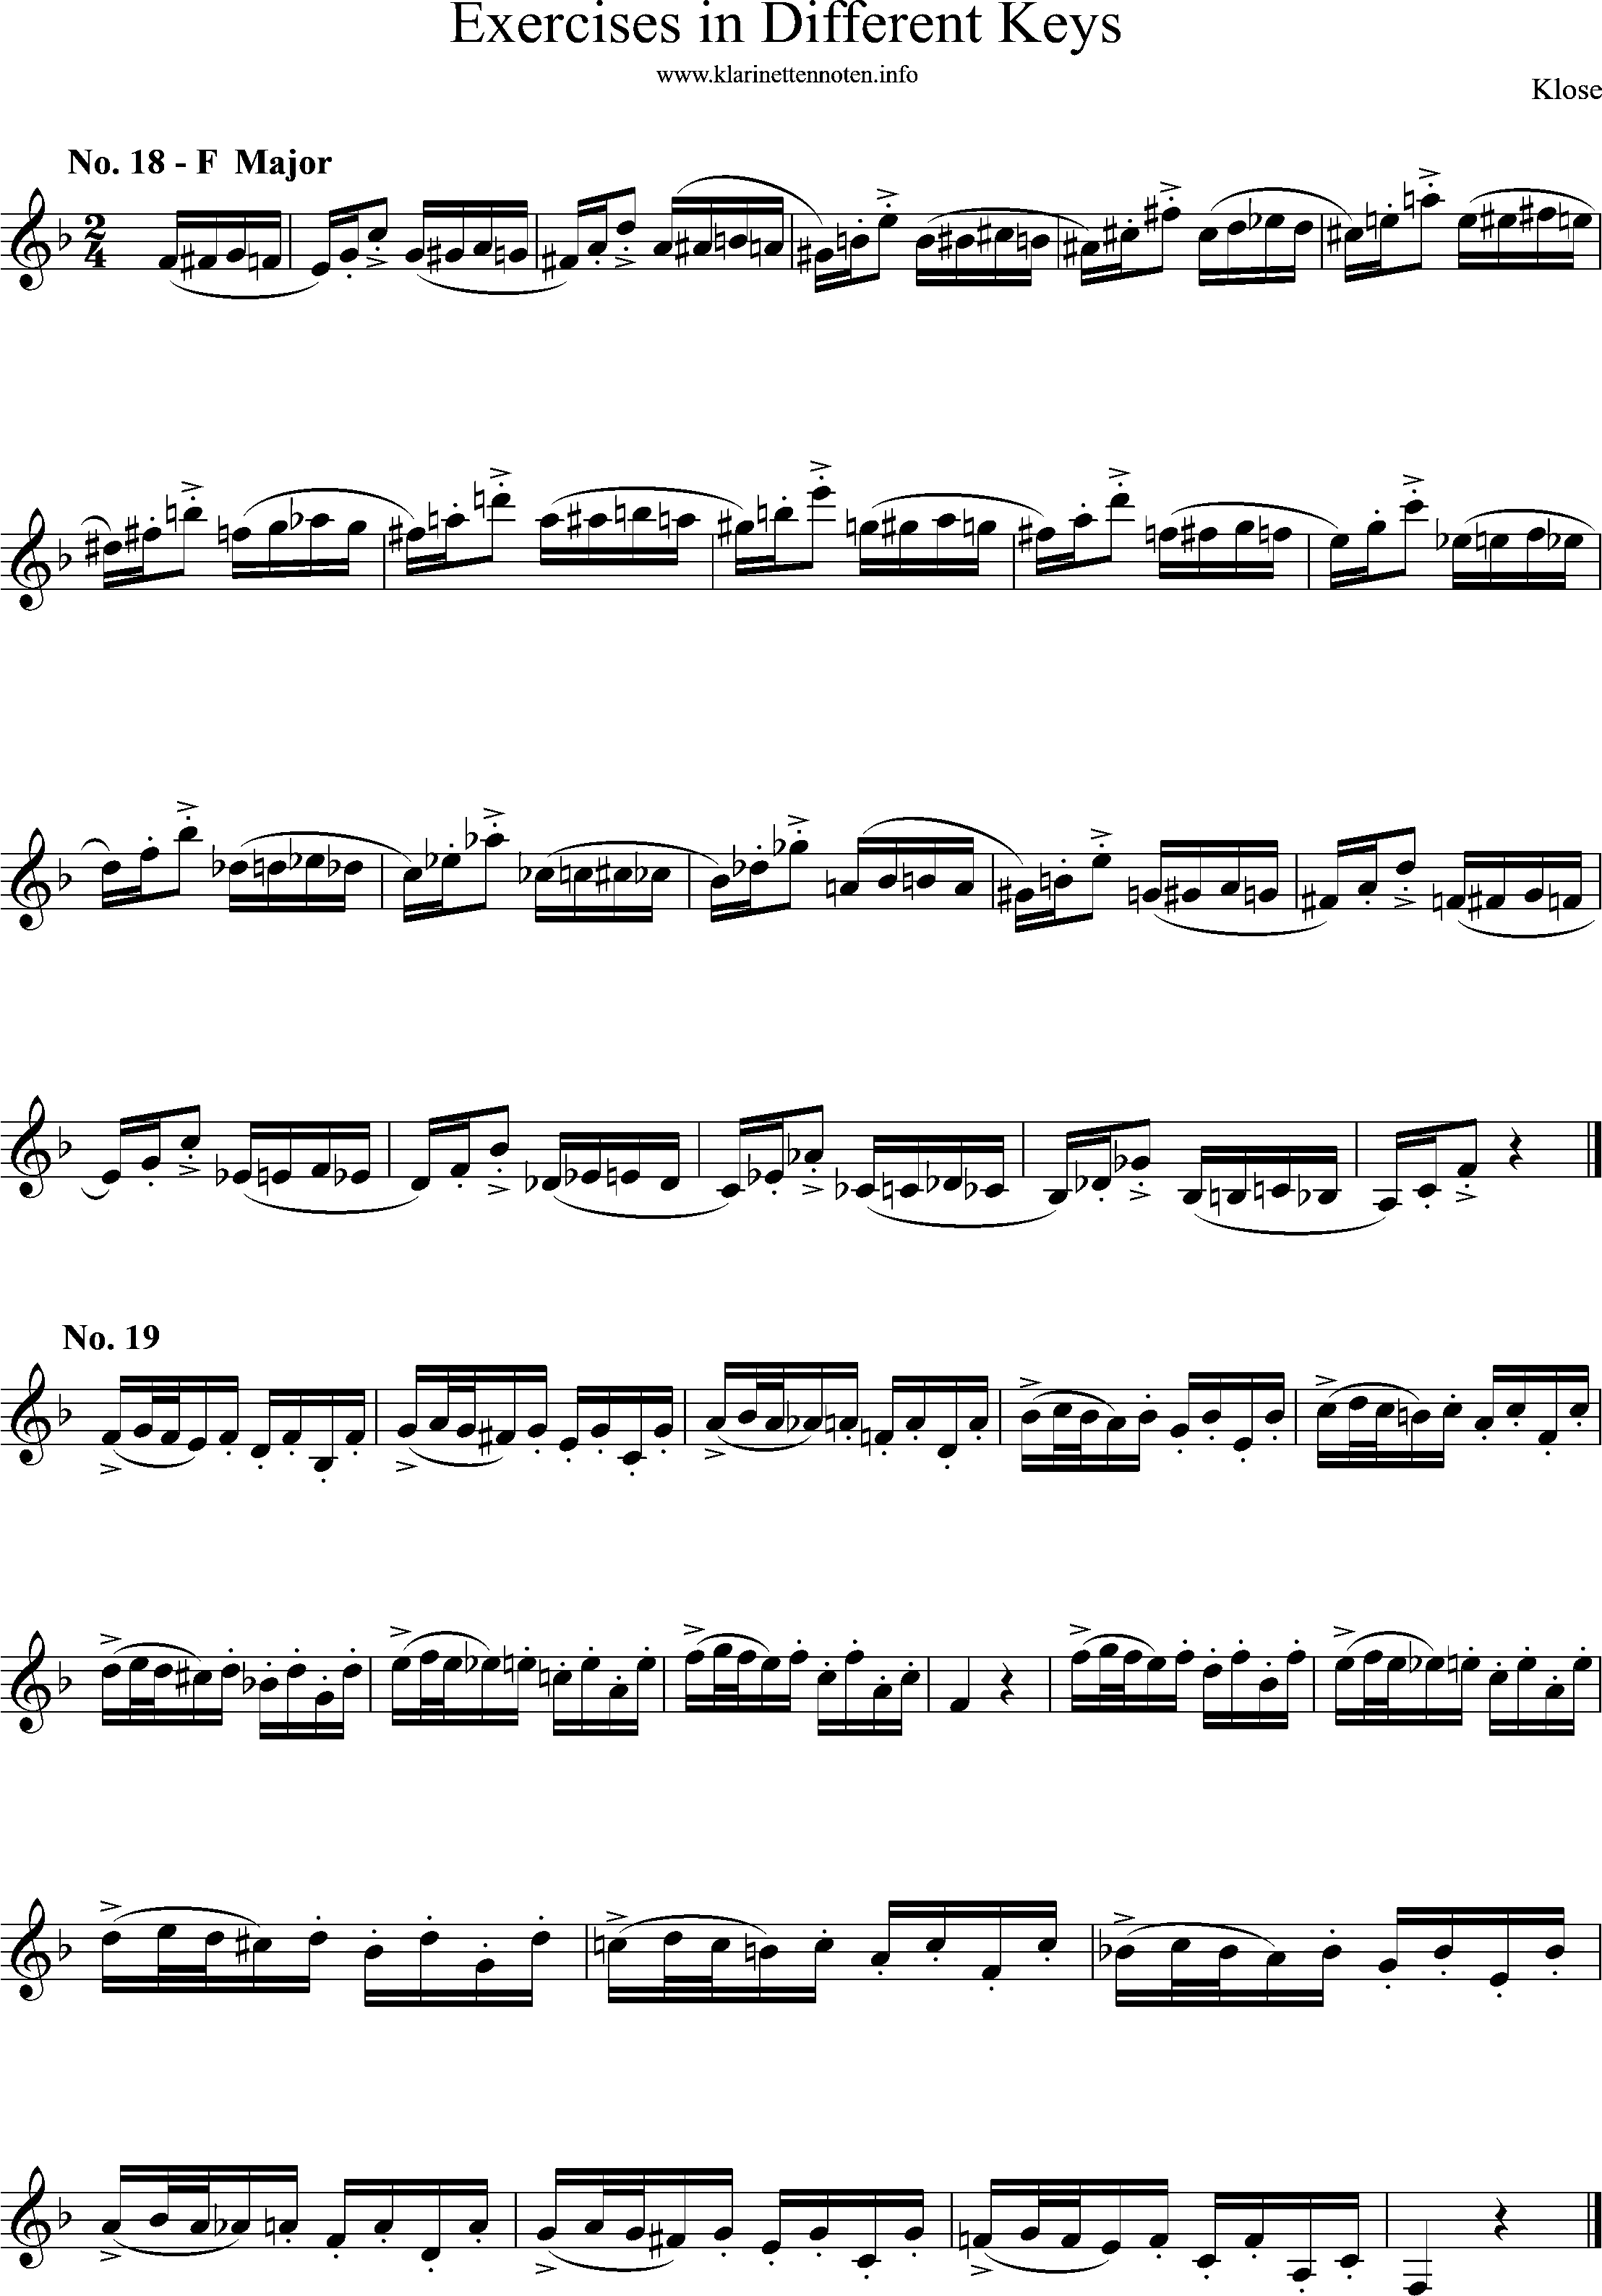 Exercises in Differewnt Keys, klose, No-18-19, F-Major